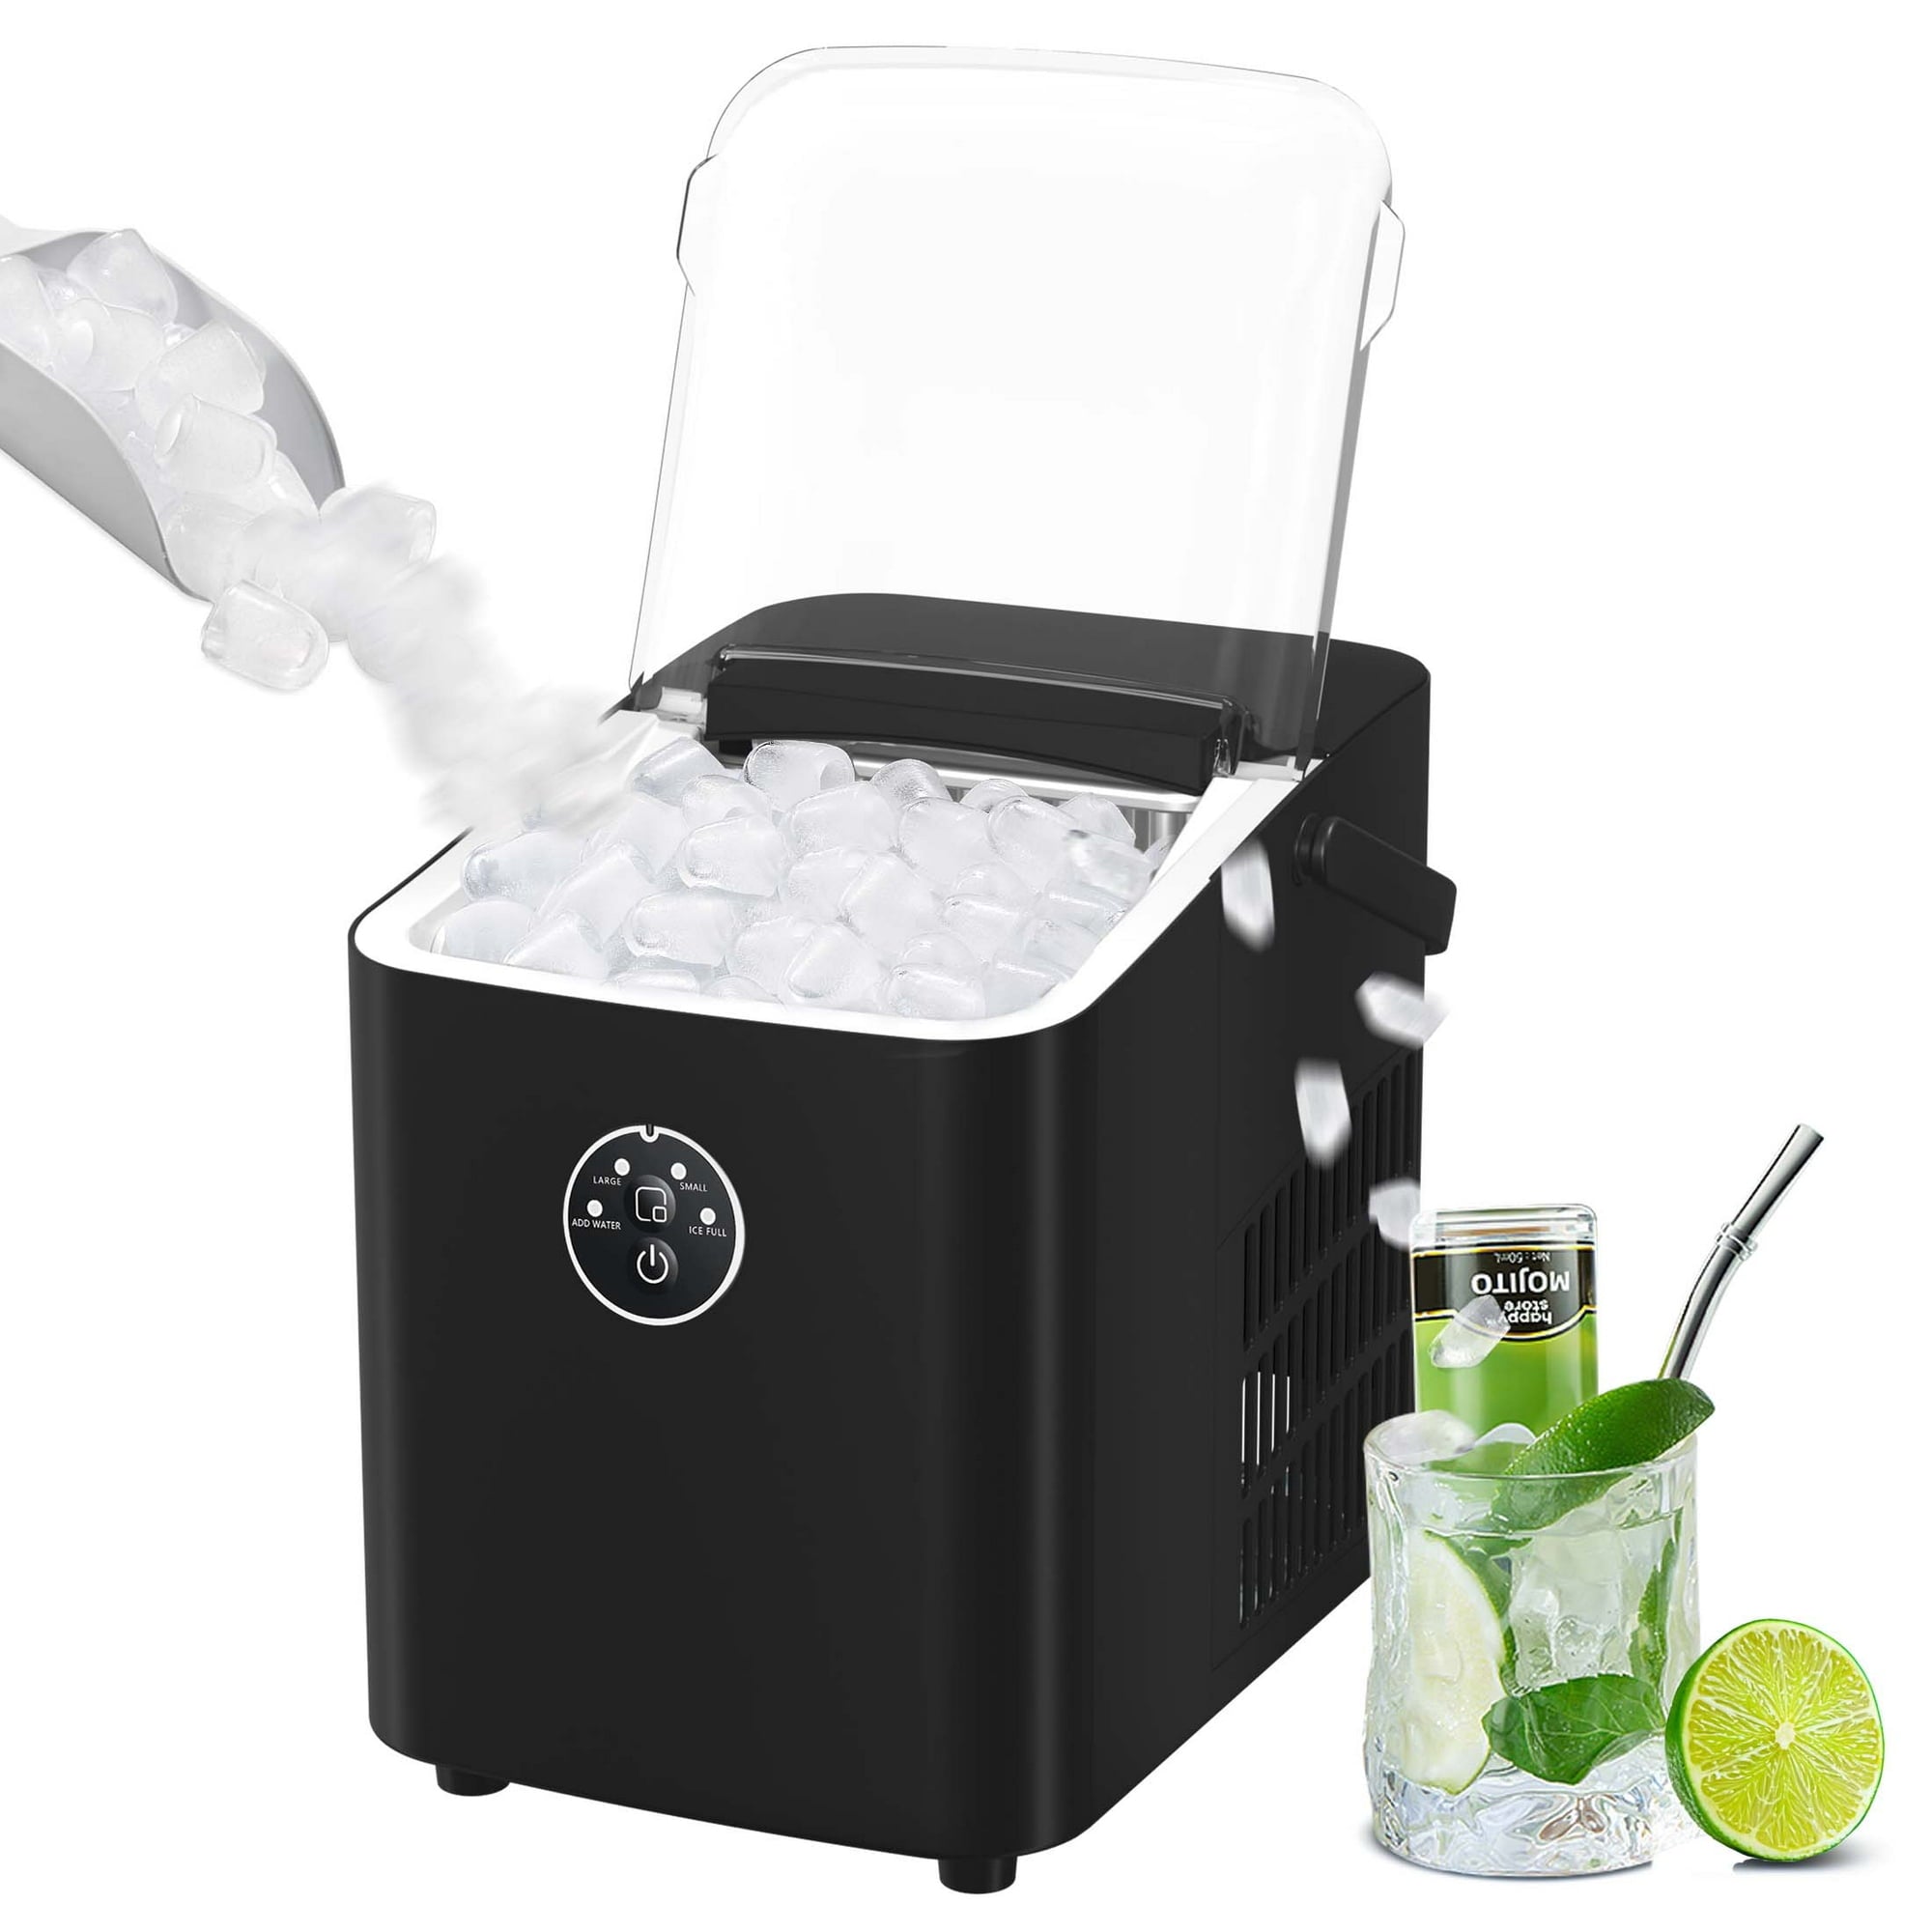  HBN Ice Maker - Portable Countertop Ice Maker Machine with Self  Cleaning, 26 lbs ice in 24 Hours, 9 Cubes Ready in 6 Mins with Ice Scoop  and Basket for Home/Kitchen/Office/Bar/Restaurant 